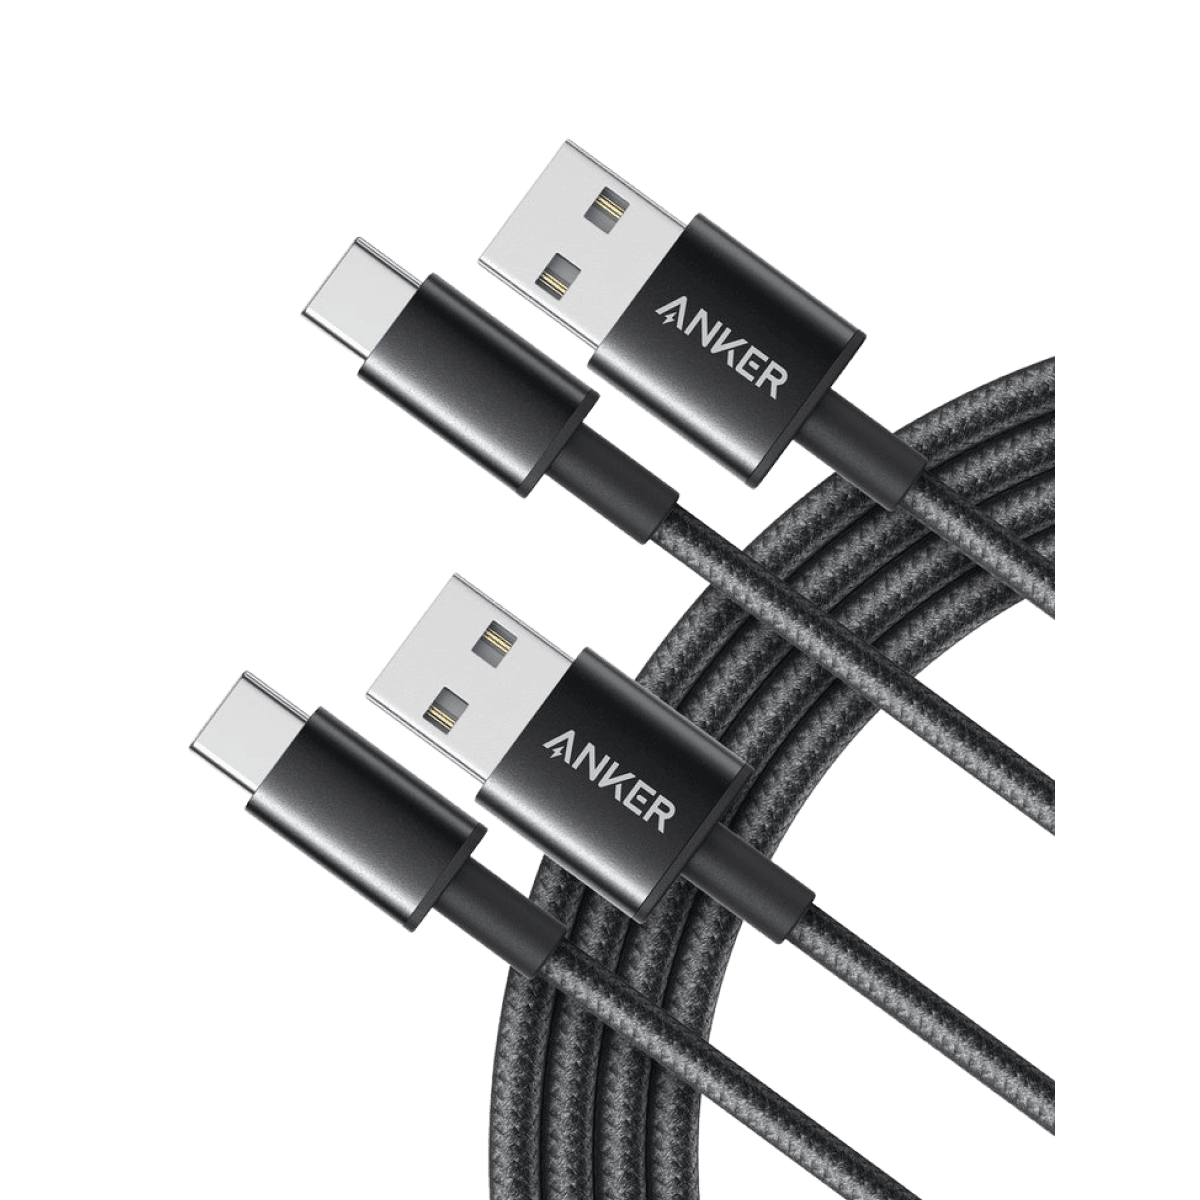 Premium Double-Braided Nylon USB-C to USB-A Cable